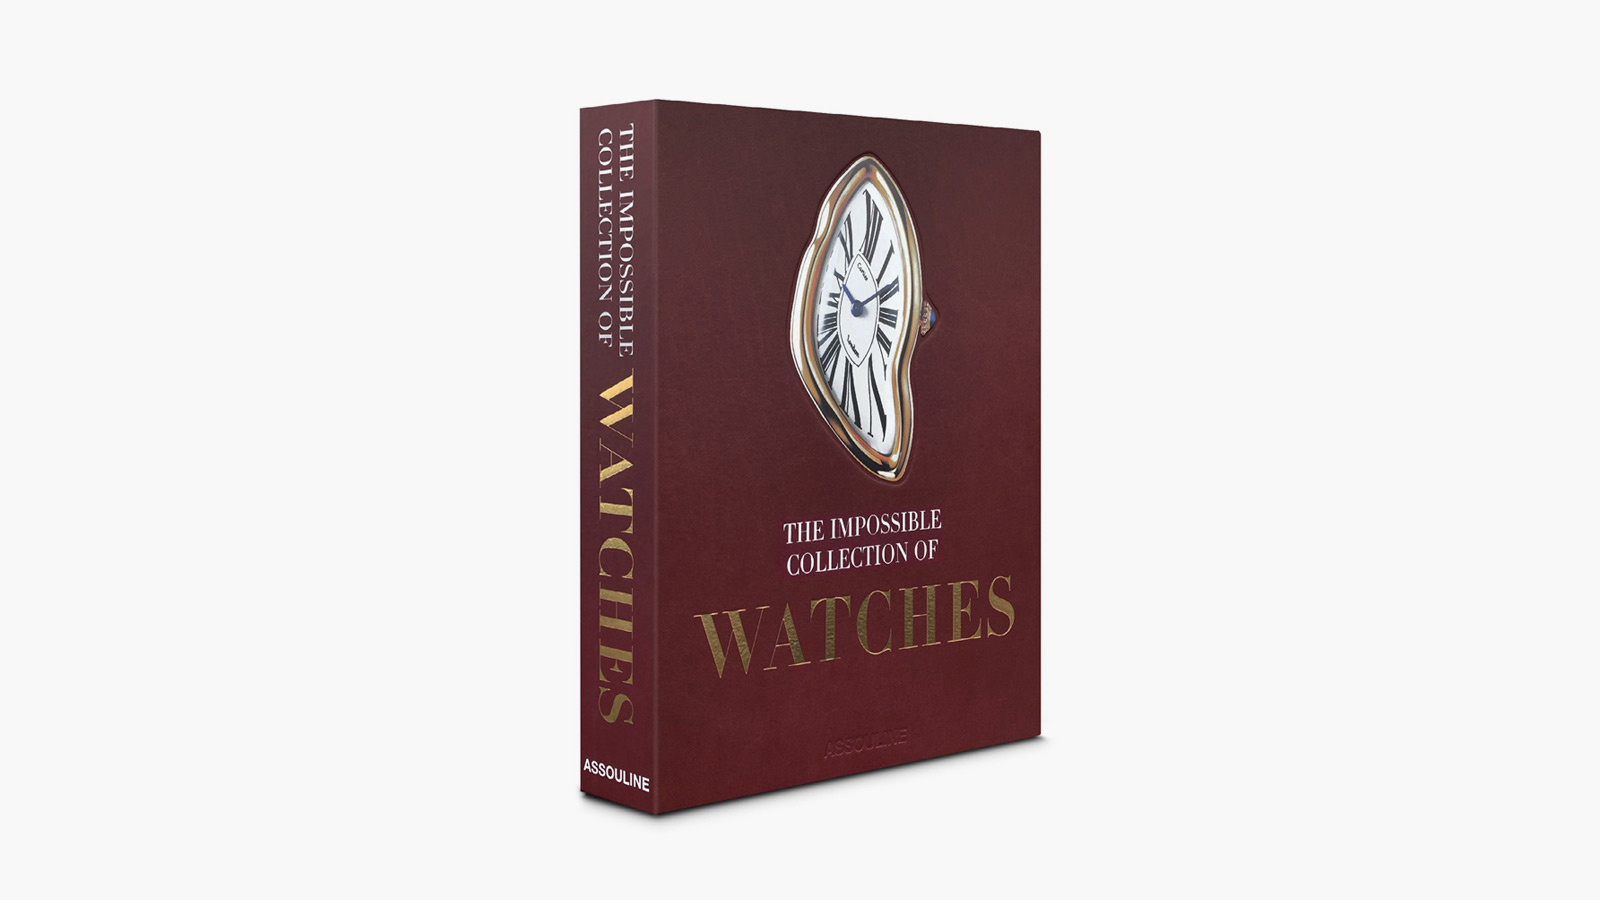 'The Impossible Collection of Watches 2nd Edition' by Nicholas Foulkes